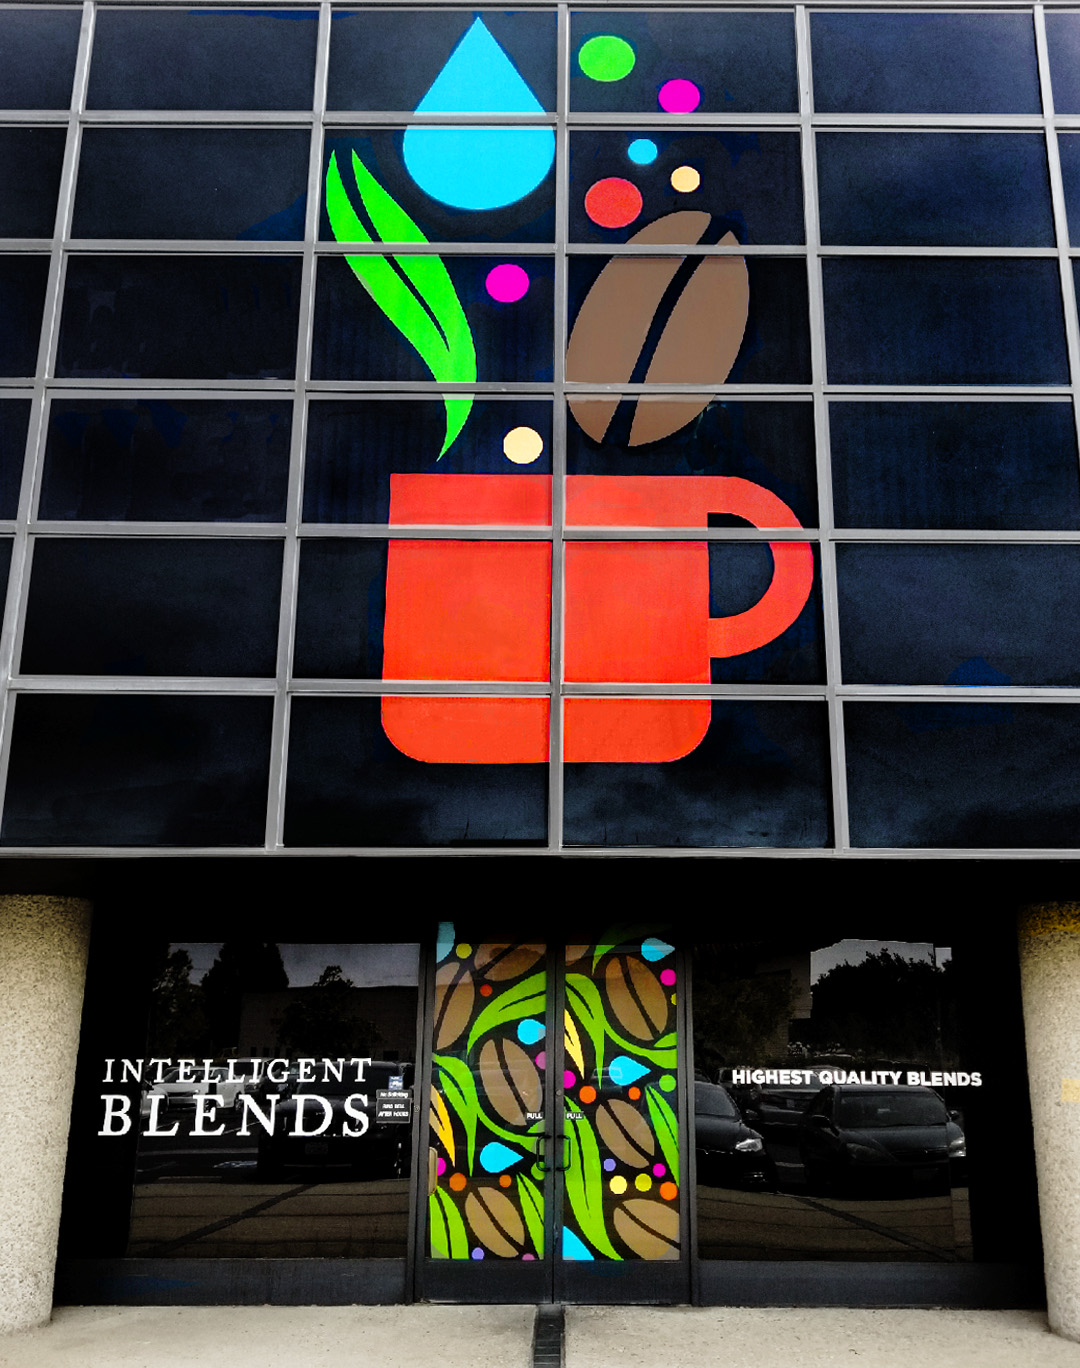 Window Perforation Film on building showing image of bright orange coffee cup, green leaves and bright blue water droplet